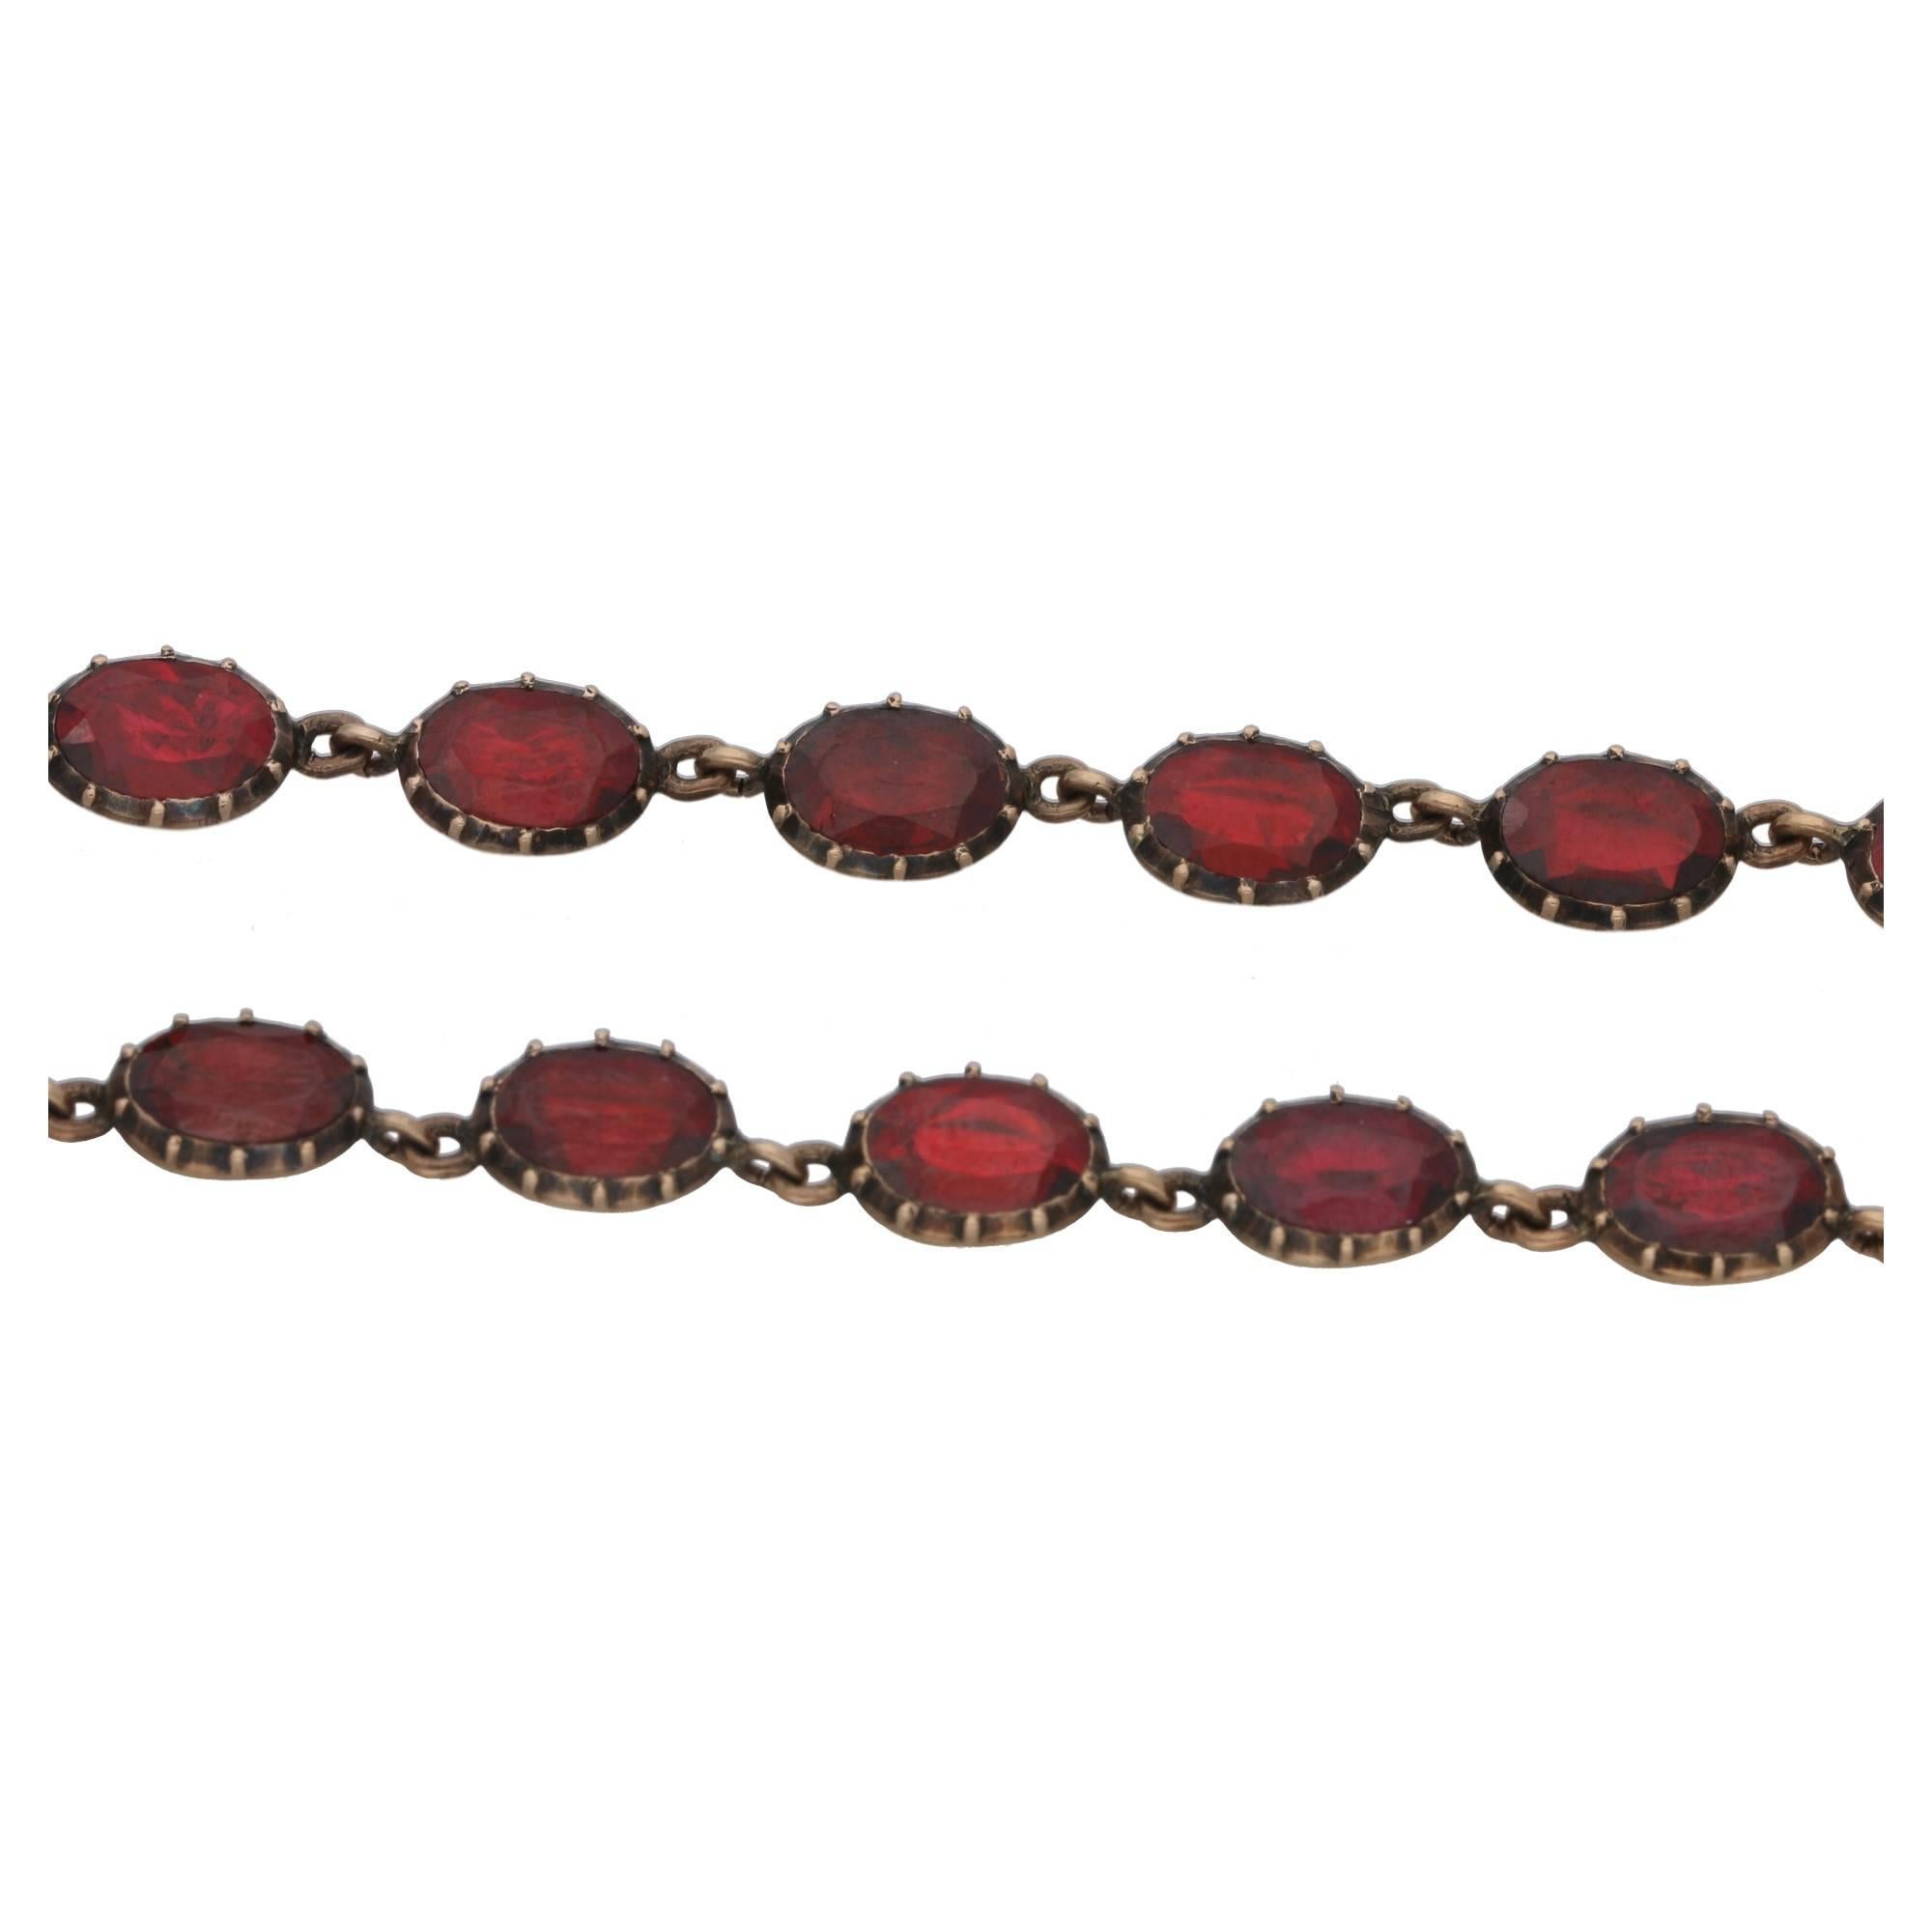 A vibrant Victorian riviere garnet necklace foil back set in 9ct yellow gold. Comprising of thirty five foil backed oval faceted garnets closed backed set in 9ct yellow gold. With an invisible tongue in groove clasp hidden behind one of the garnets.